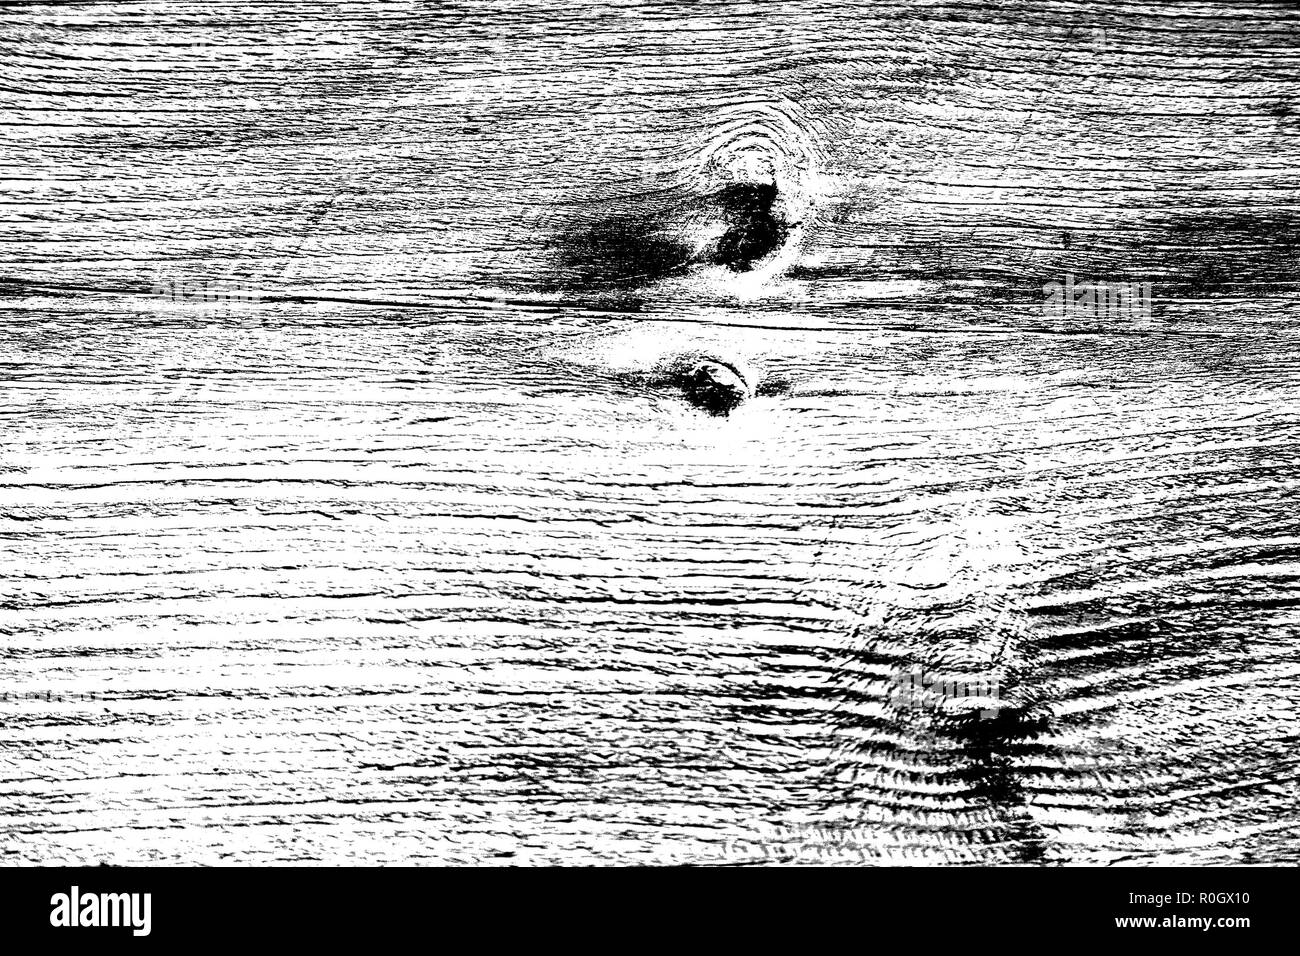 Black and white high contrast wooden texture, lengthwise cut with knots and vertical scratches Stock Photo